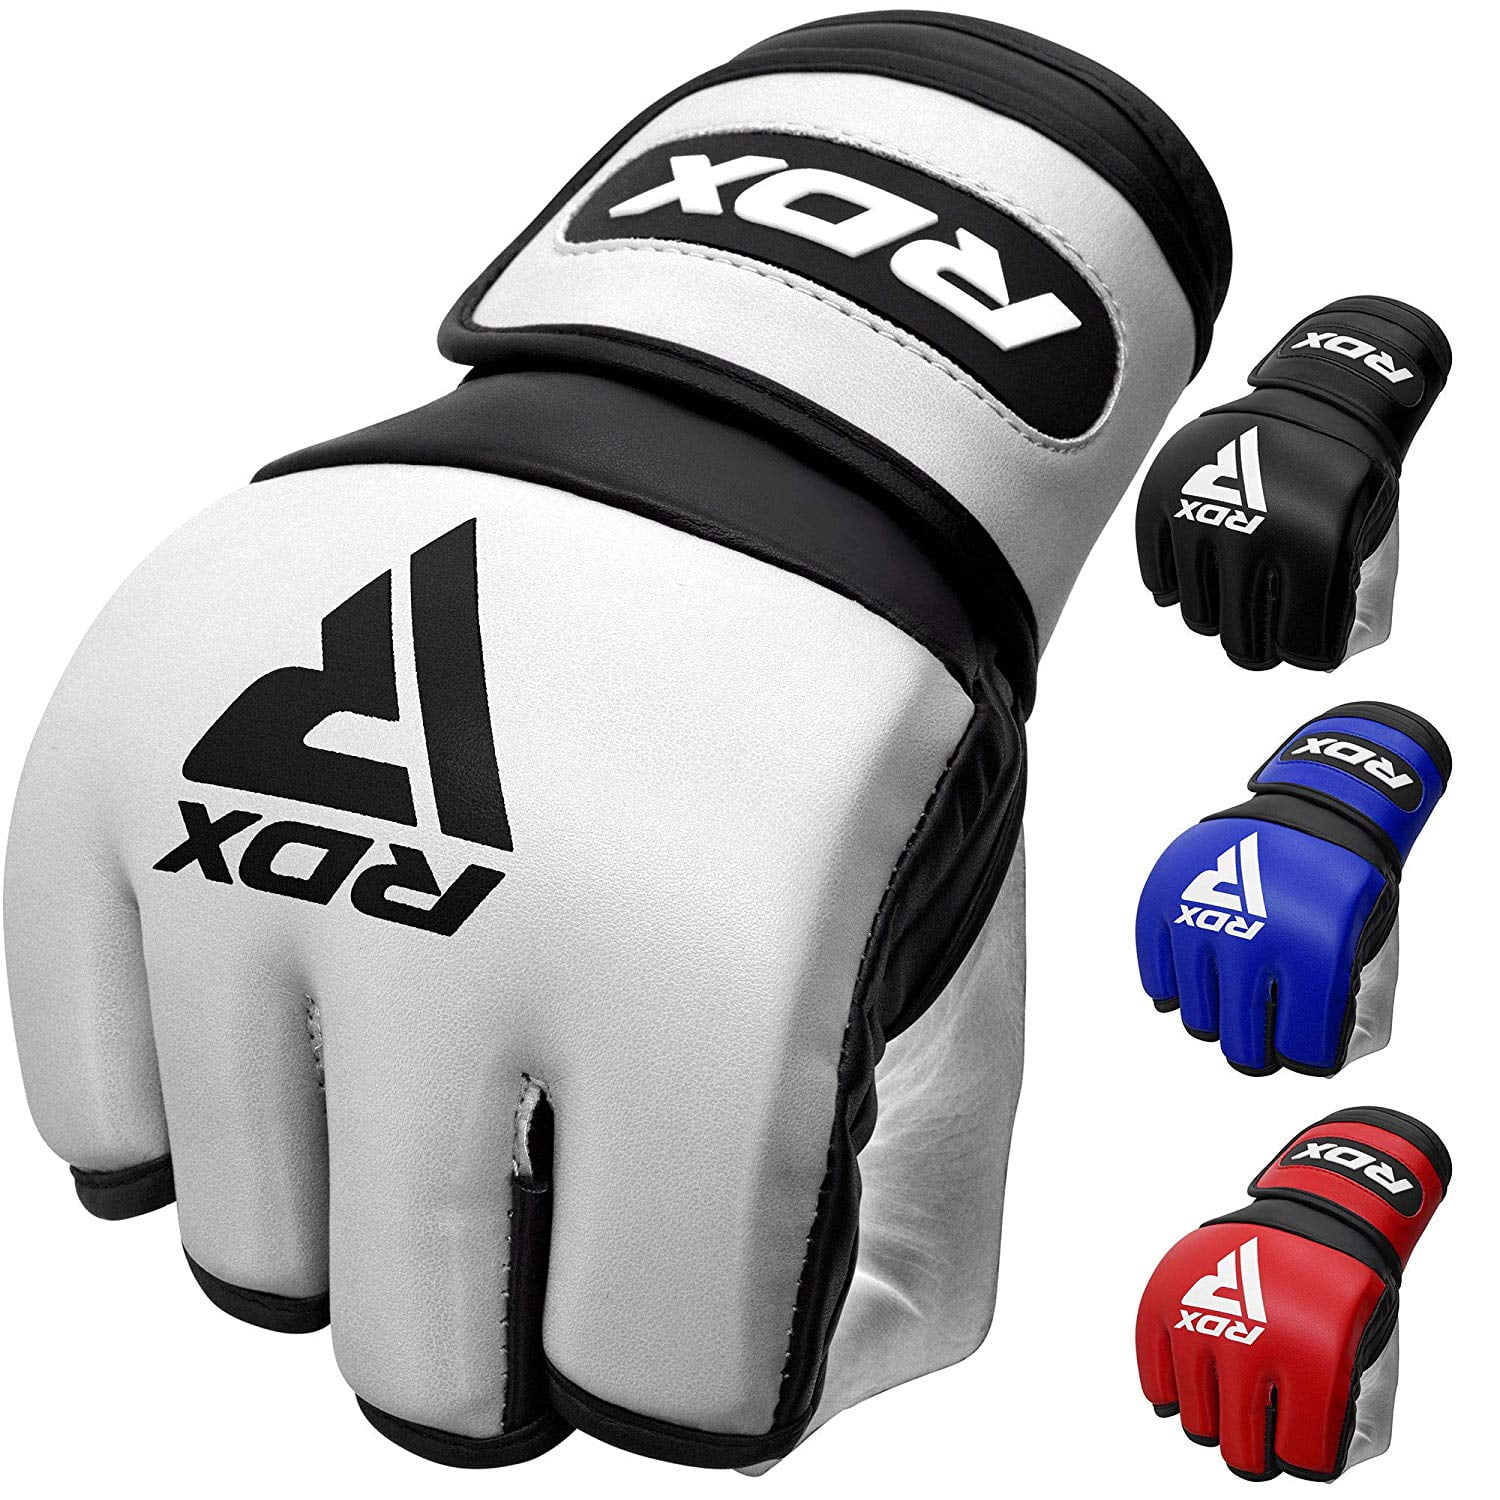 RDX Leather MMA Gloves Grappling Fighting Boxing Punching Bag Training CA 